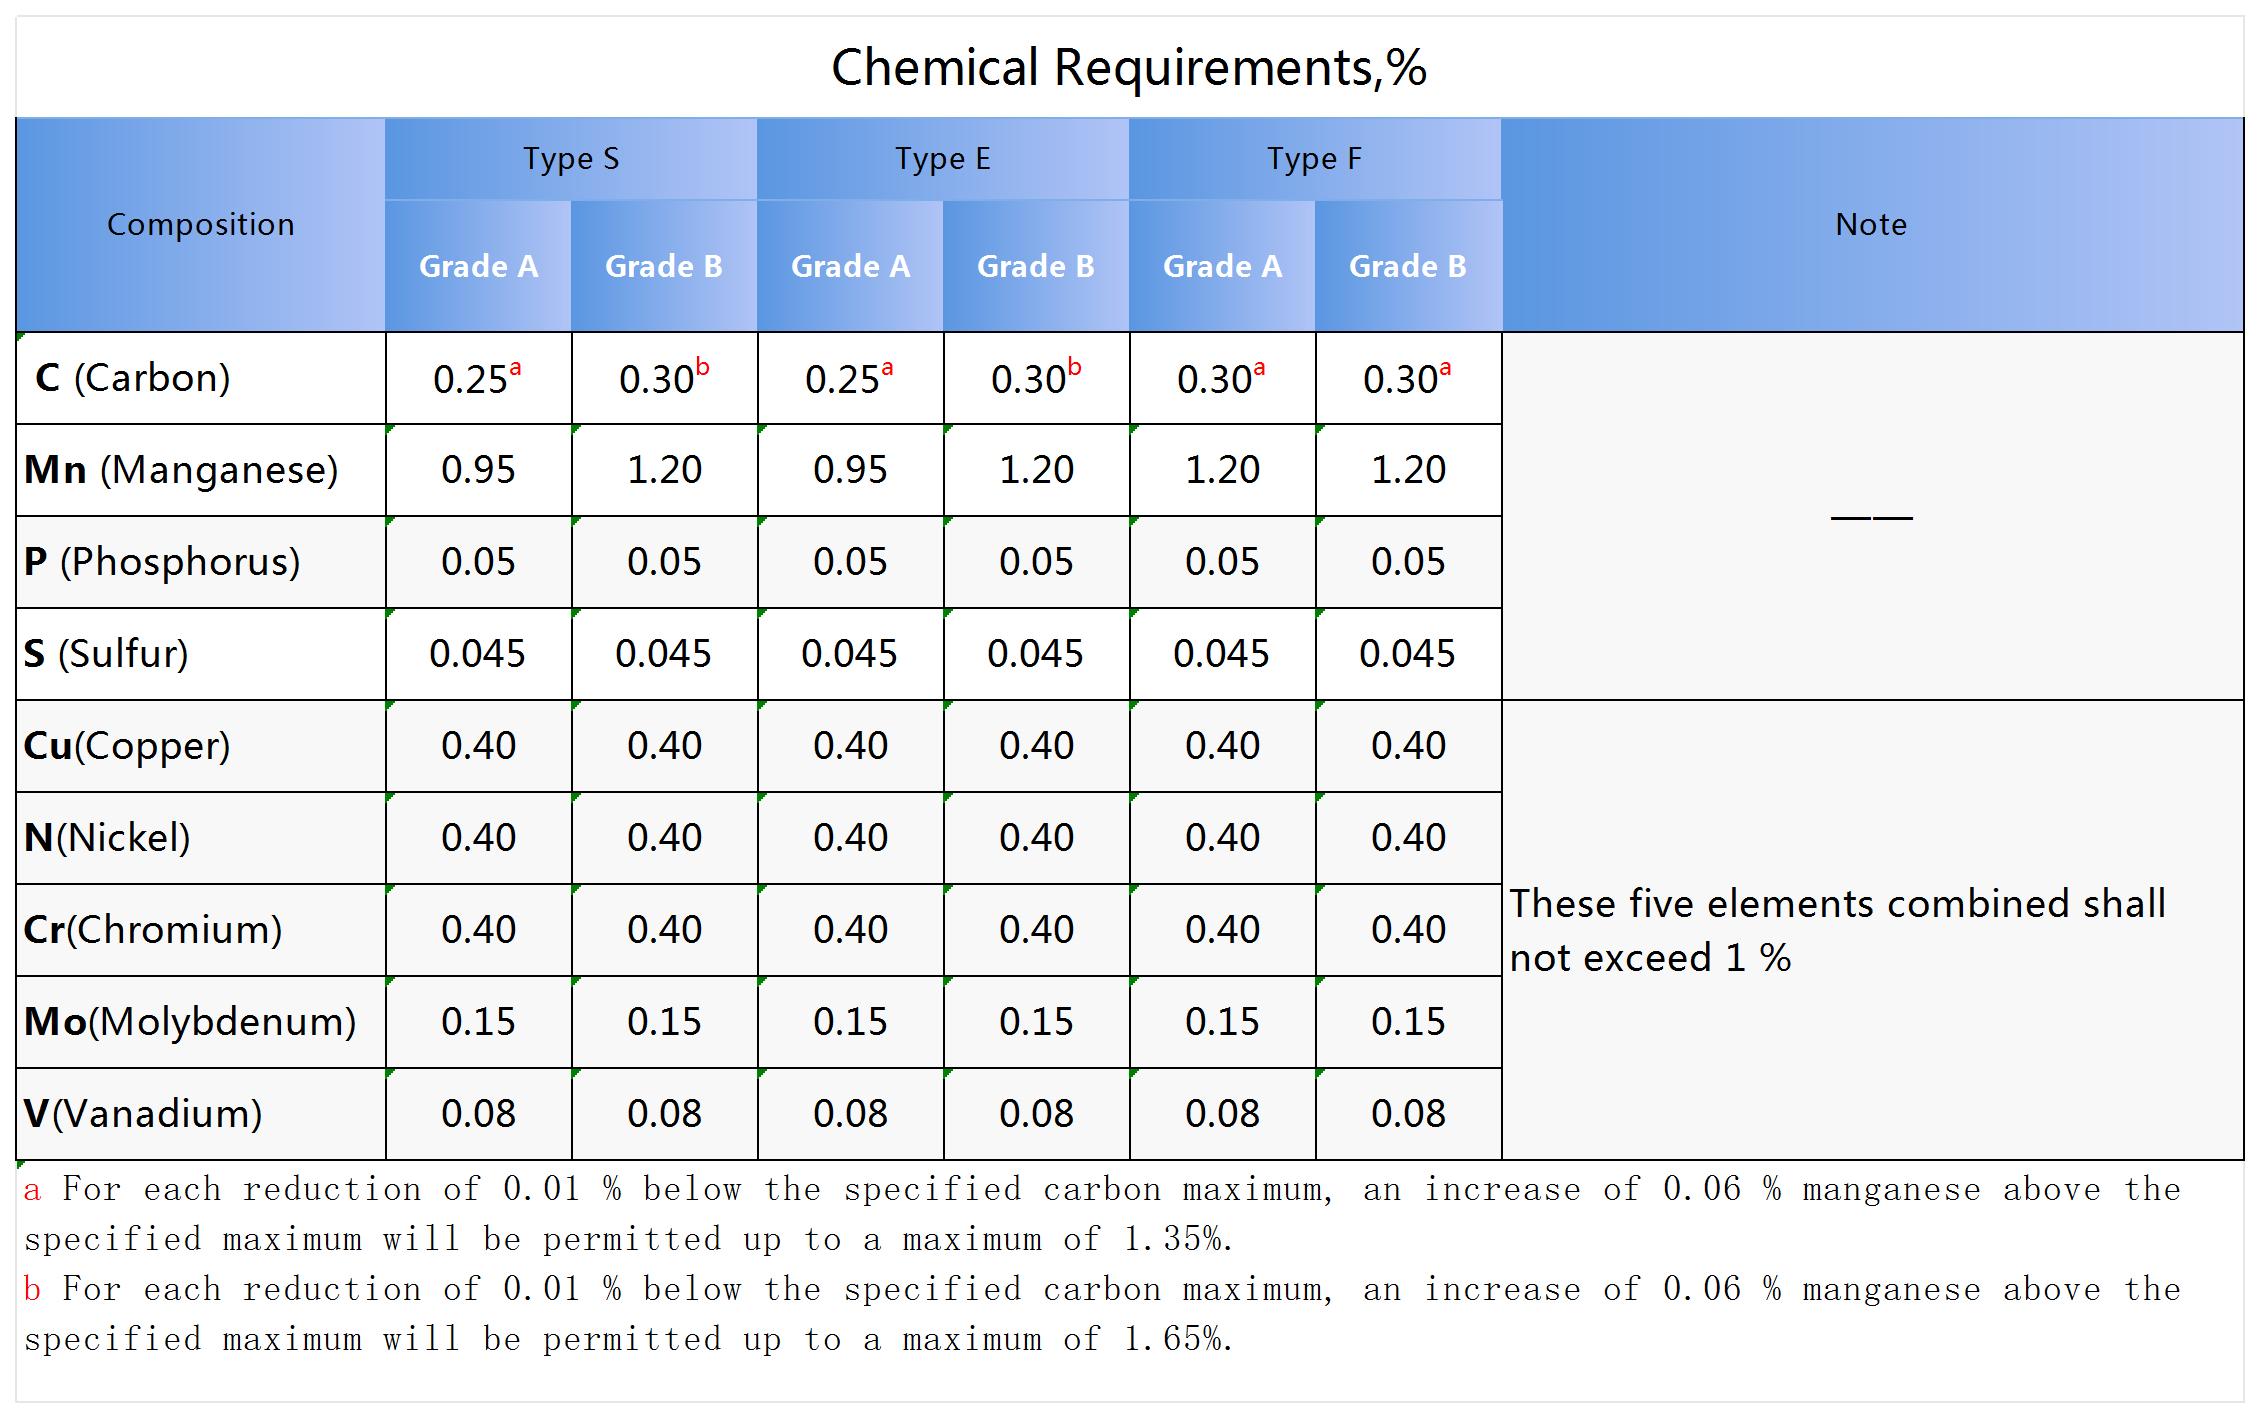 A53_Chemical Requirements